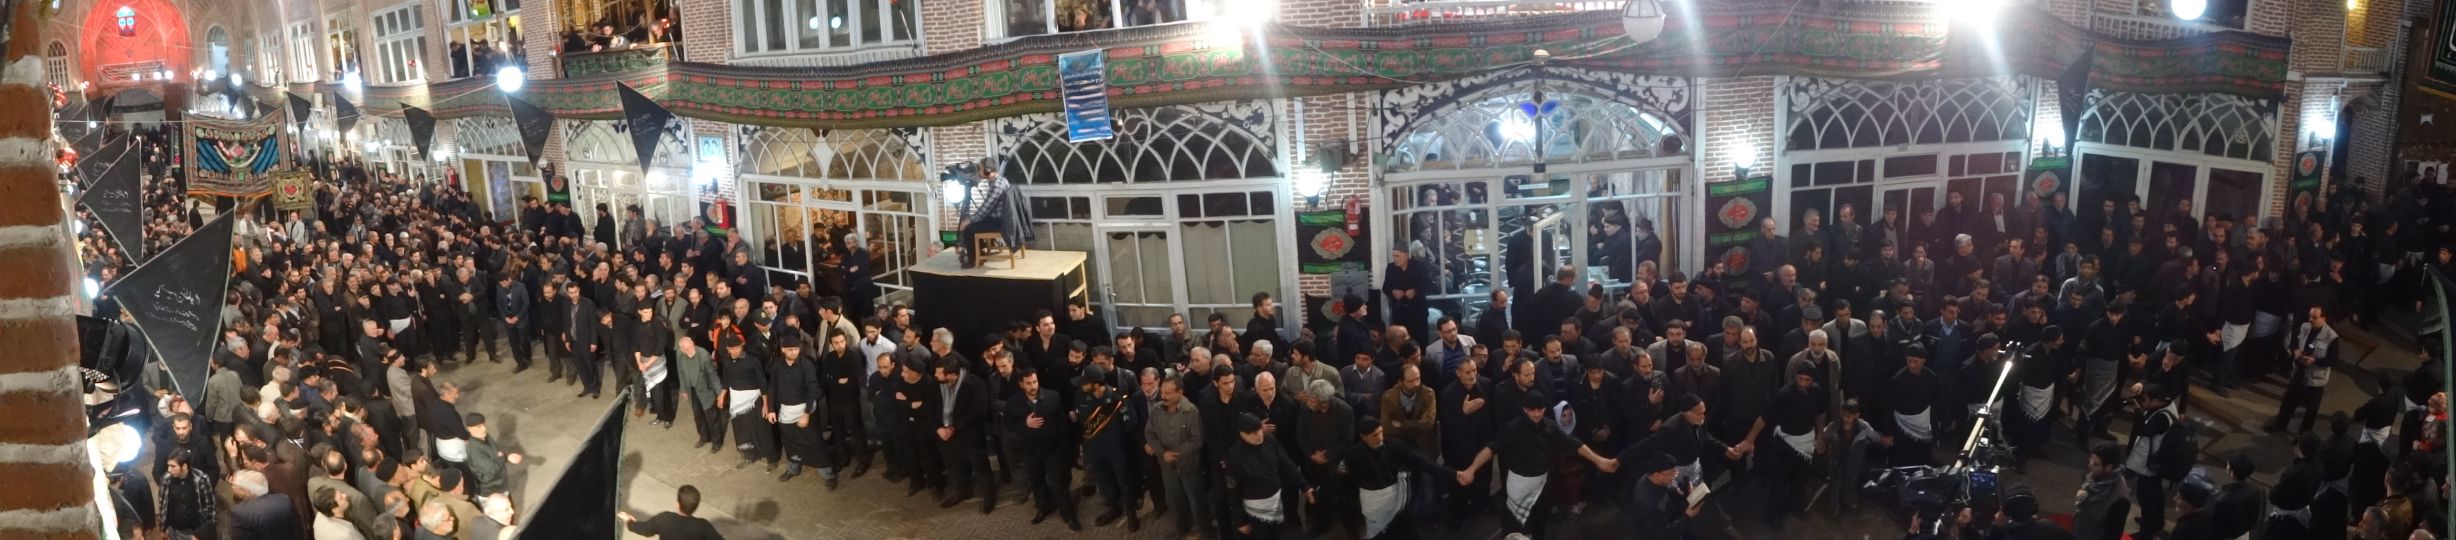 Tabriz bazaar - watching the commemoration of Imam Hoessein from the first floor of the carpet shops in Tabriz